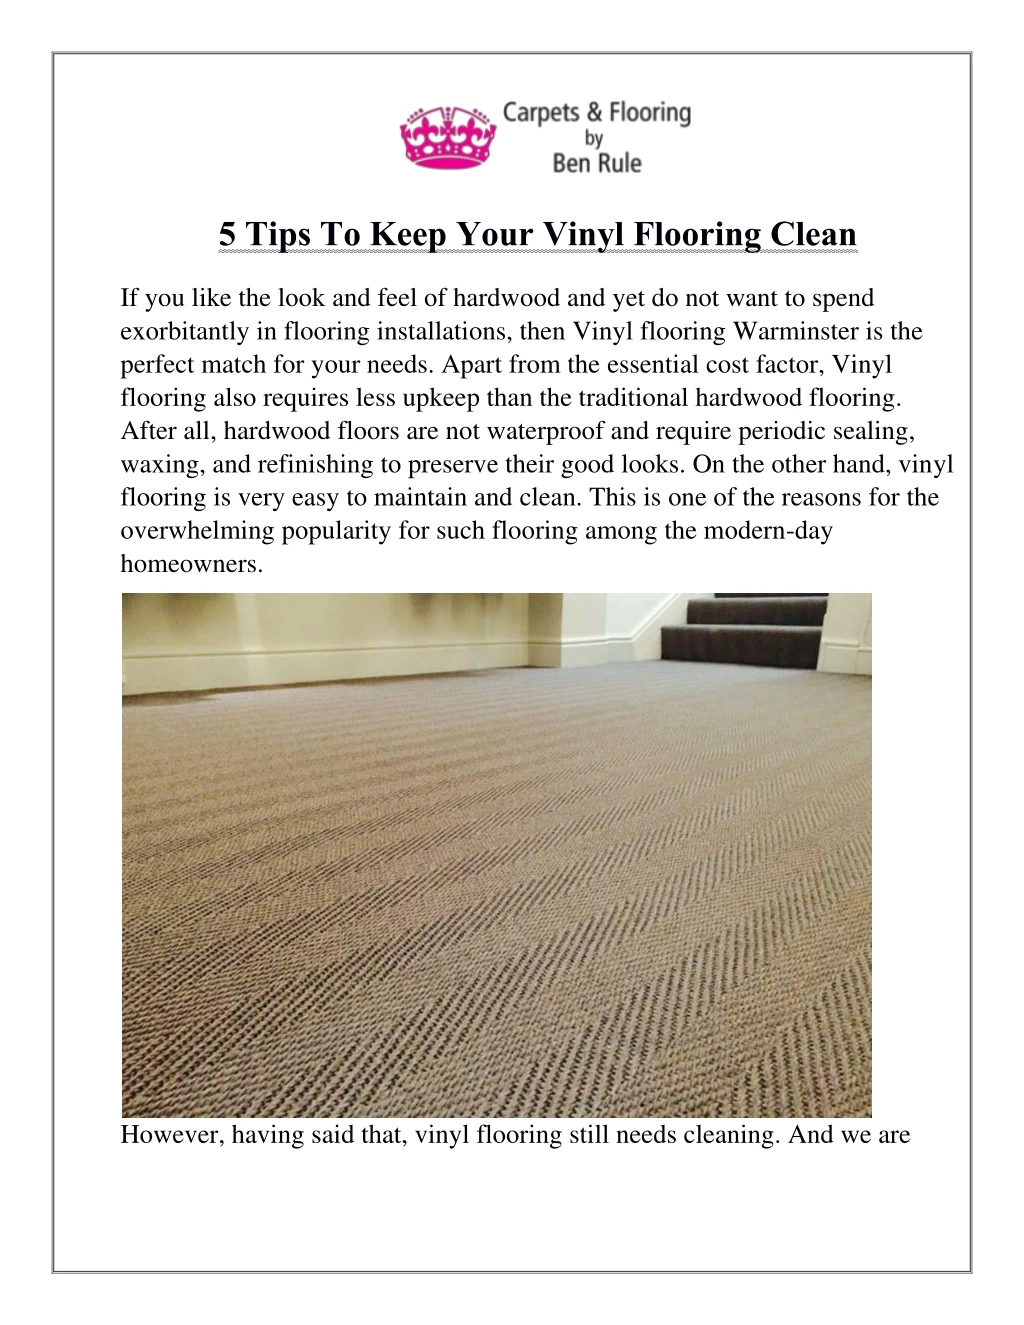 5 tips to keep your vinyl flooring clean